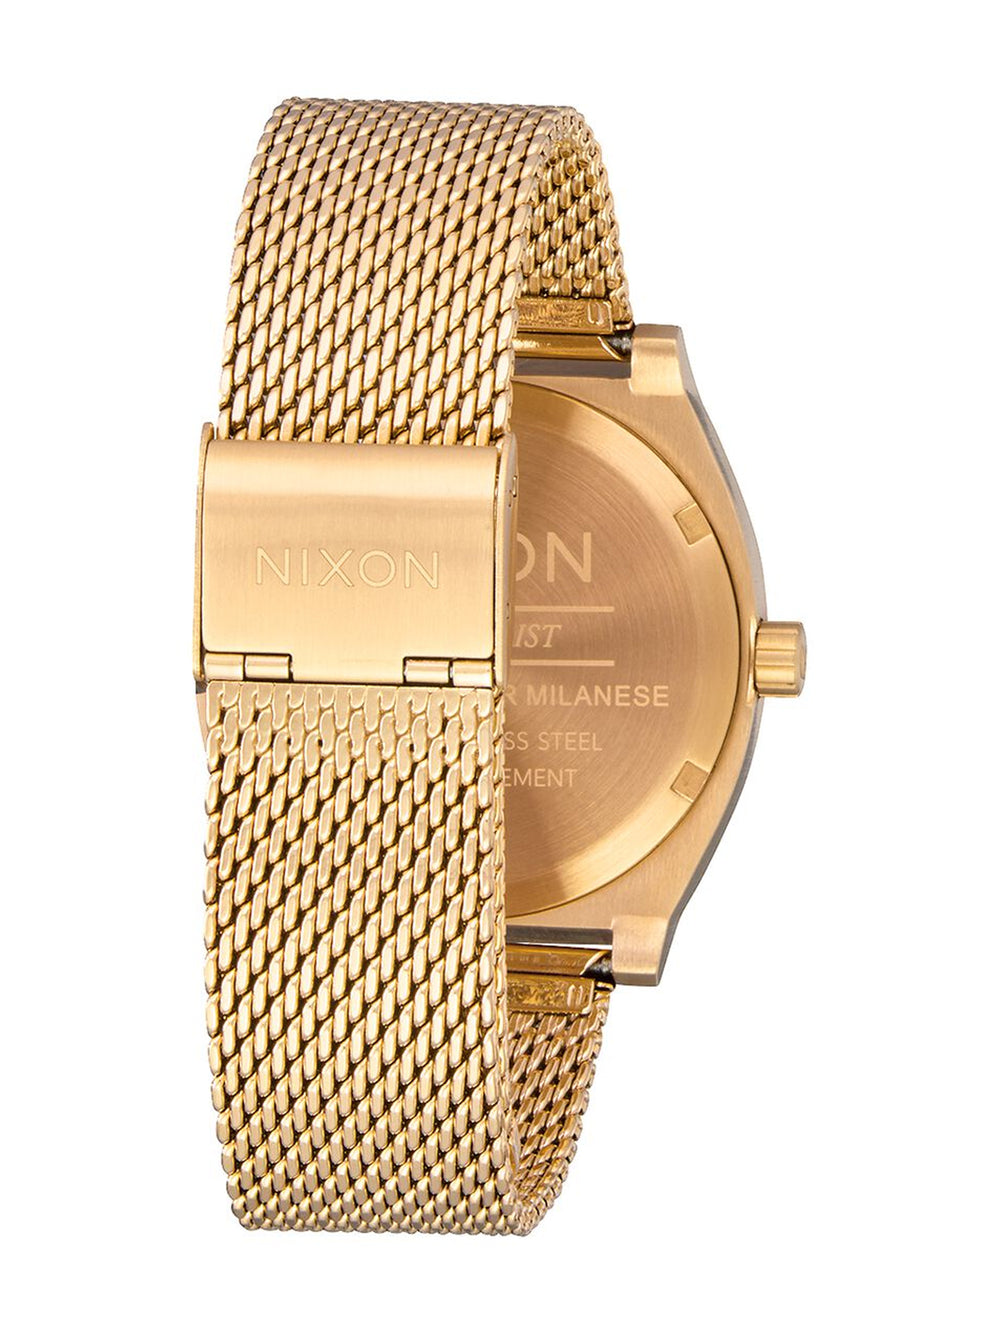 NIXON TIME TELLER MILAN - ALL GOLD WATCH - CLEARANCE